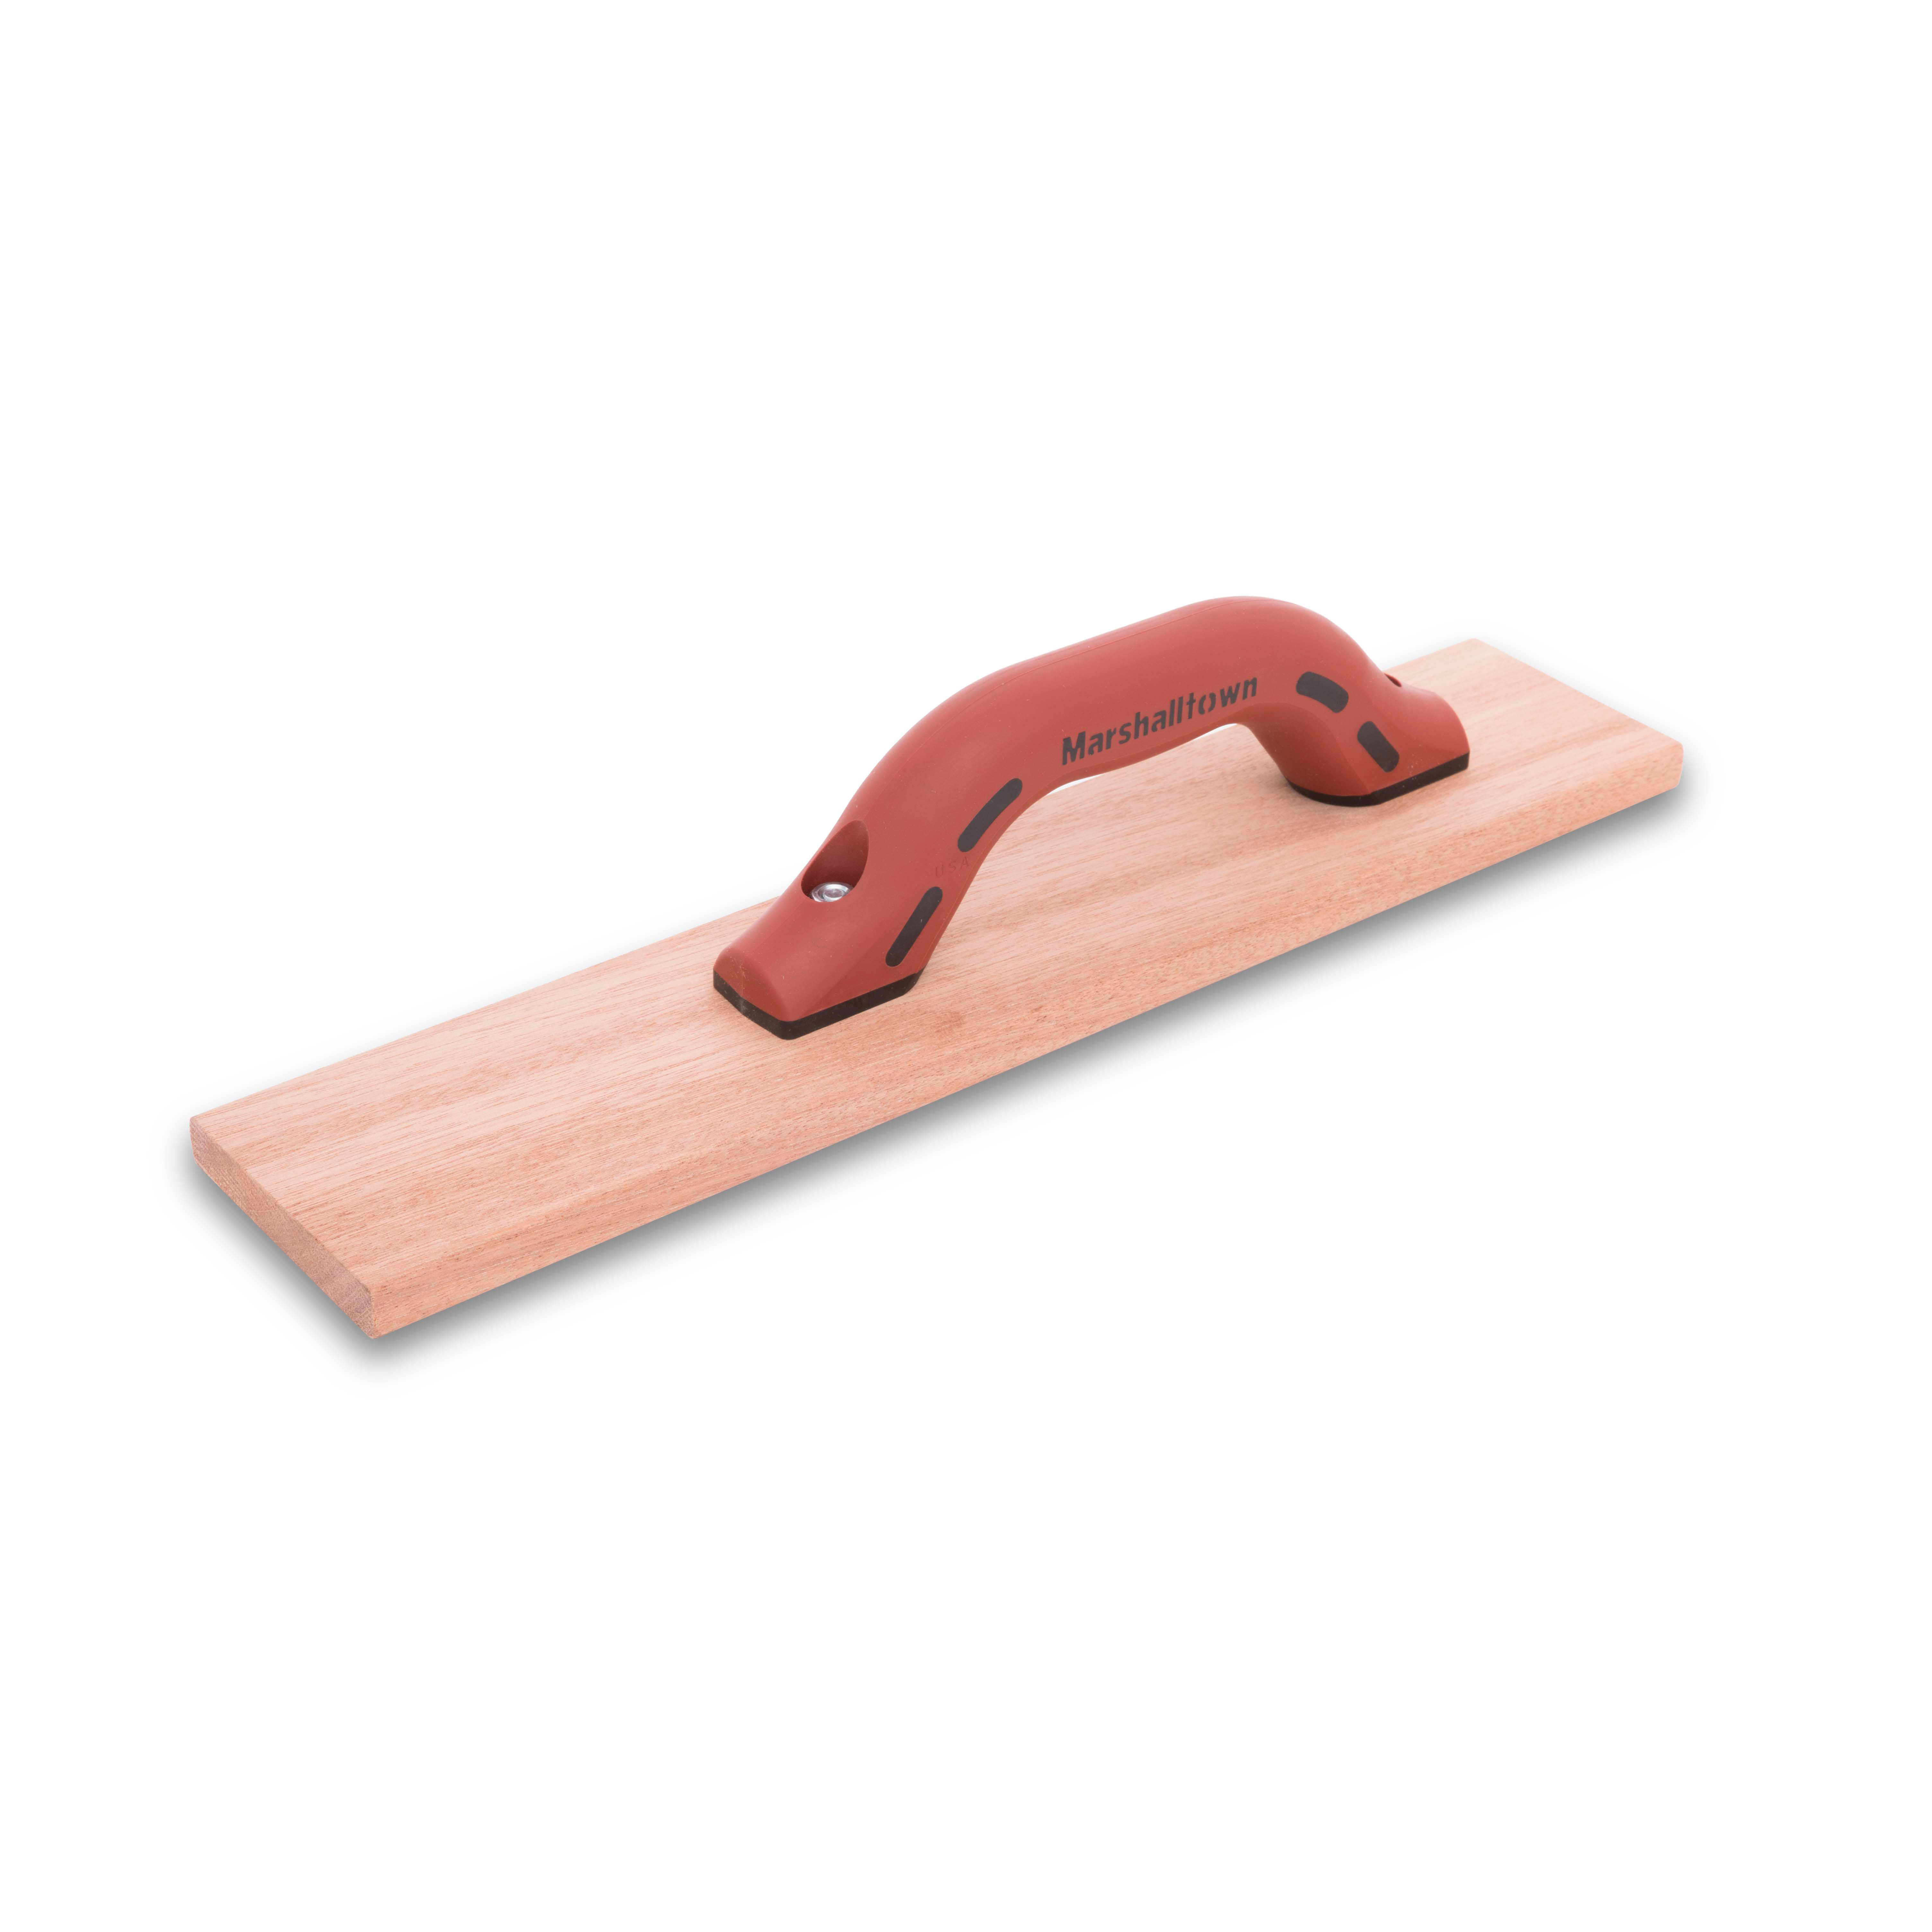 Marshalltown 147D 16in. x 3in. 1/4 Xtra-Hard Wood Float with DuraSoft Handle MAT-147D